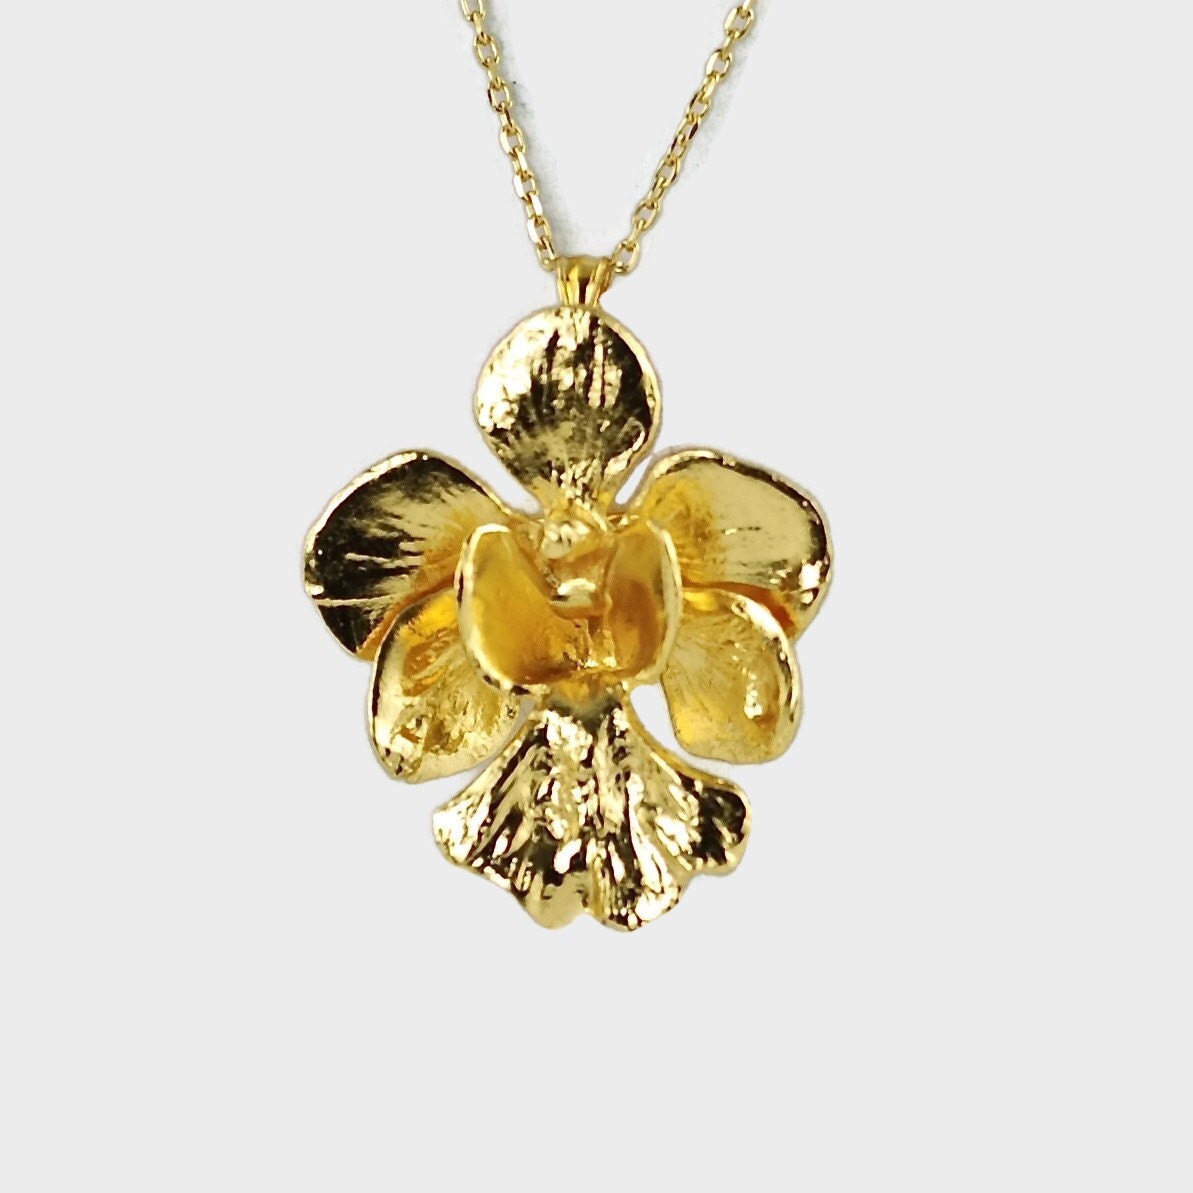 Vintage RISIS 24K Gold Plated Orchid Pendant and Necklace in